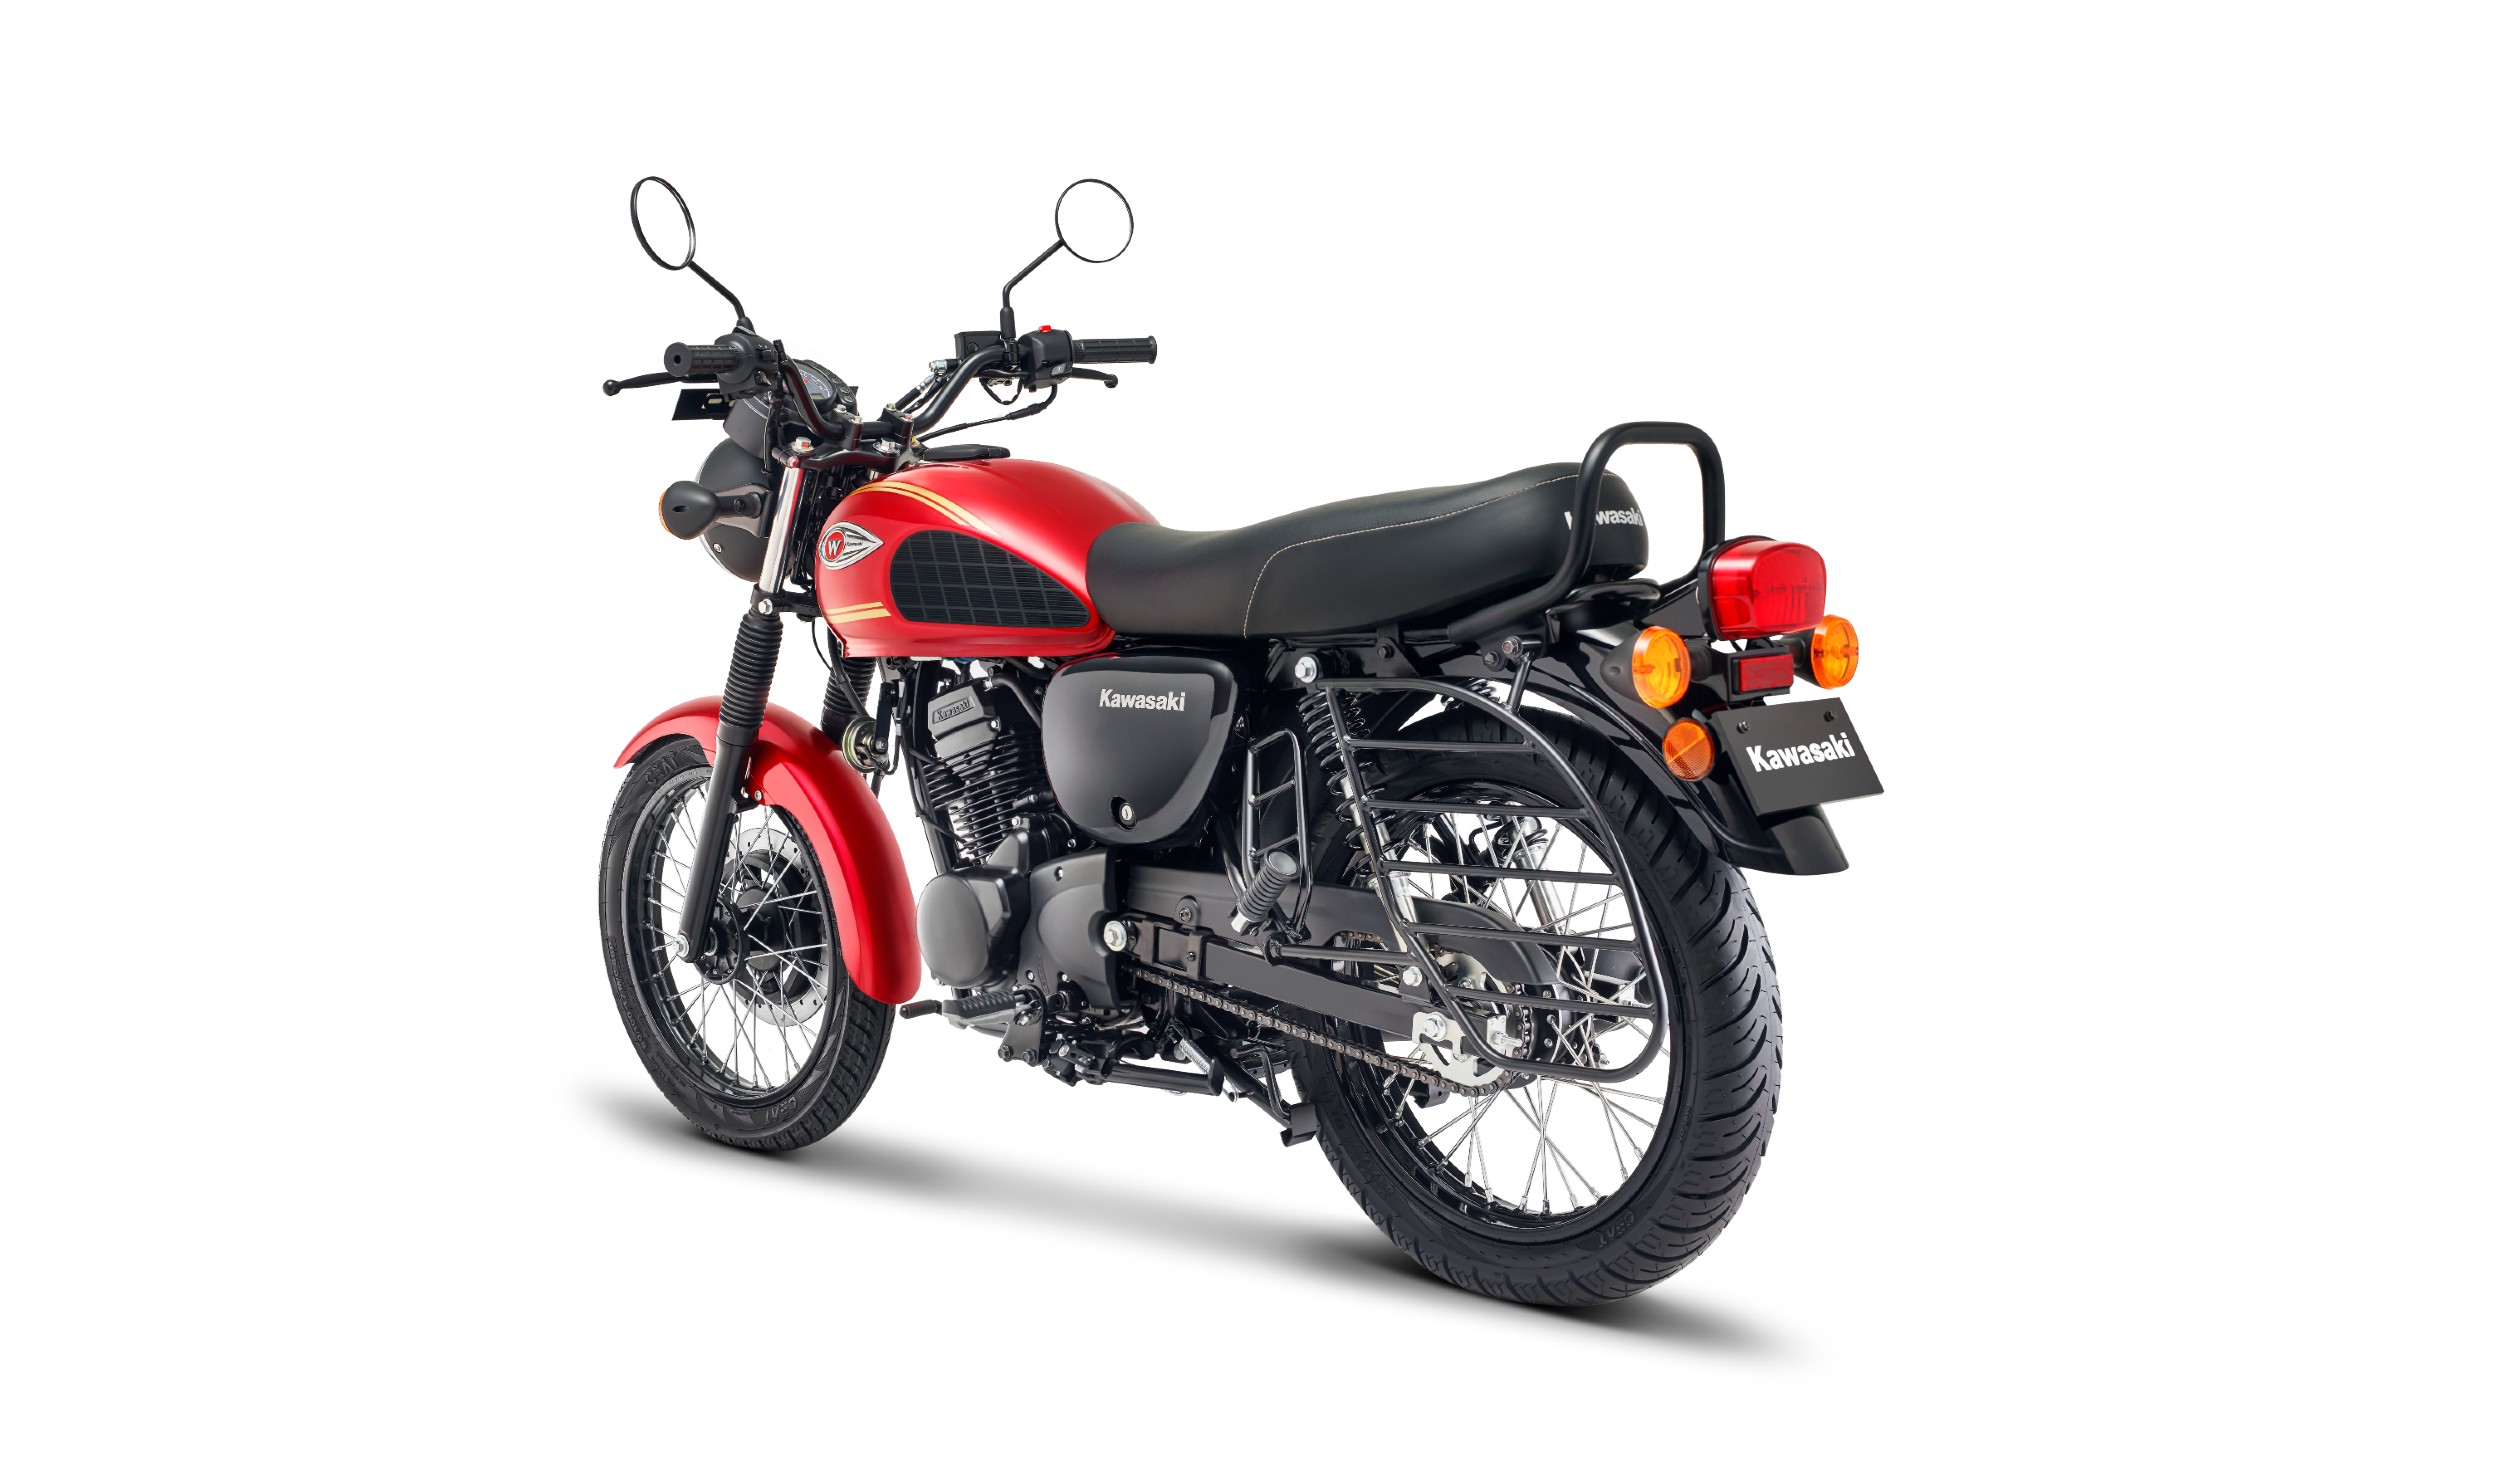 The W175 is about the same price as the TVS Ronin and Royal Enfield Hunter, but with a smaller engine and fewer features